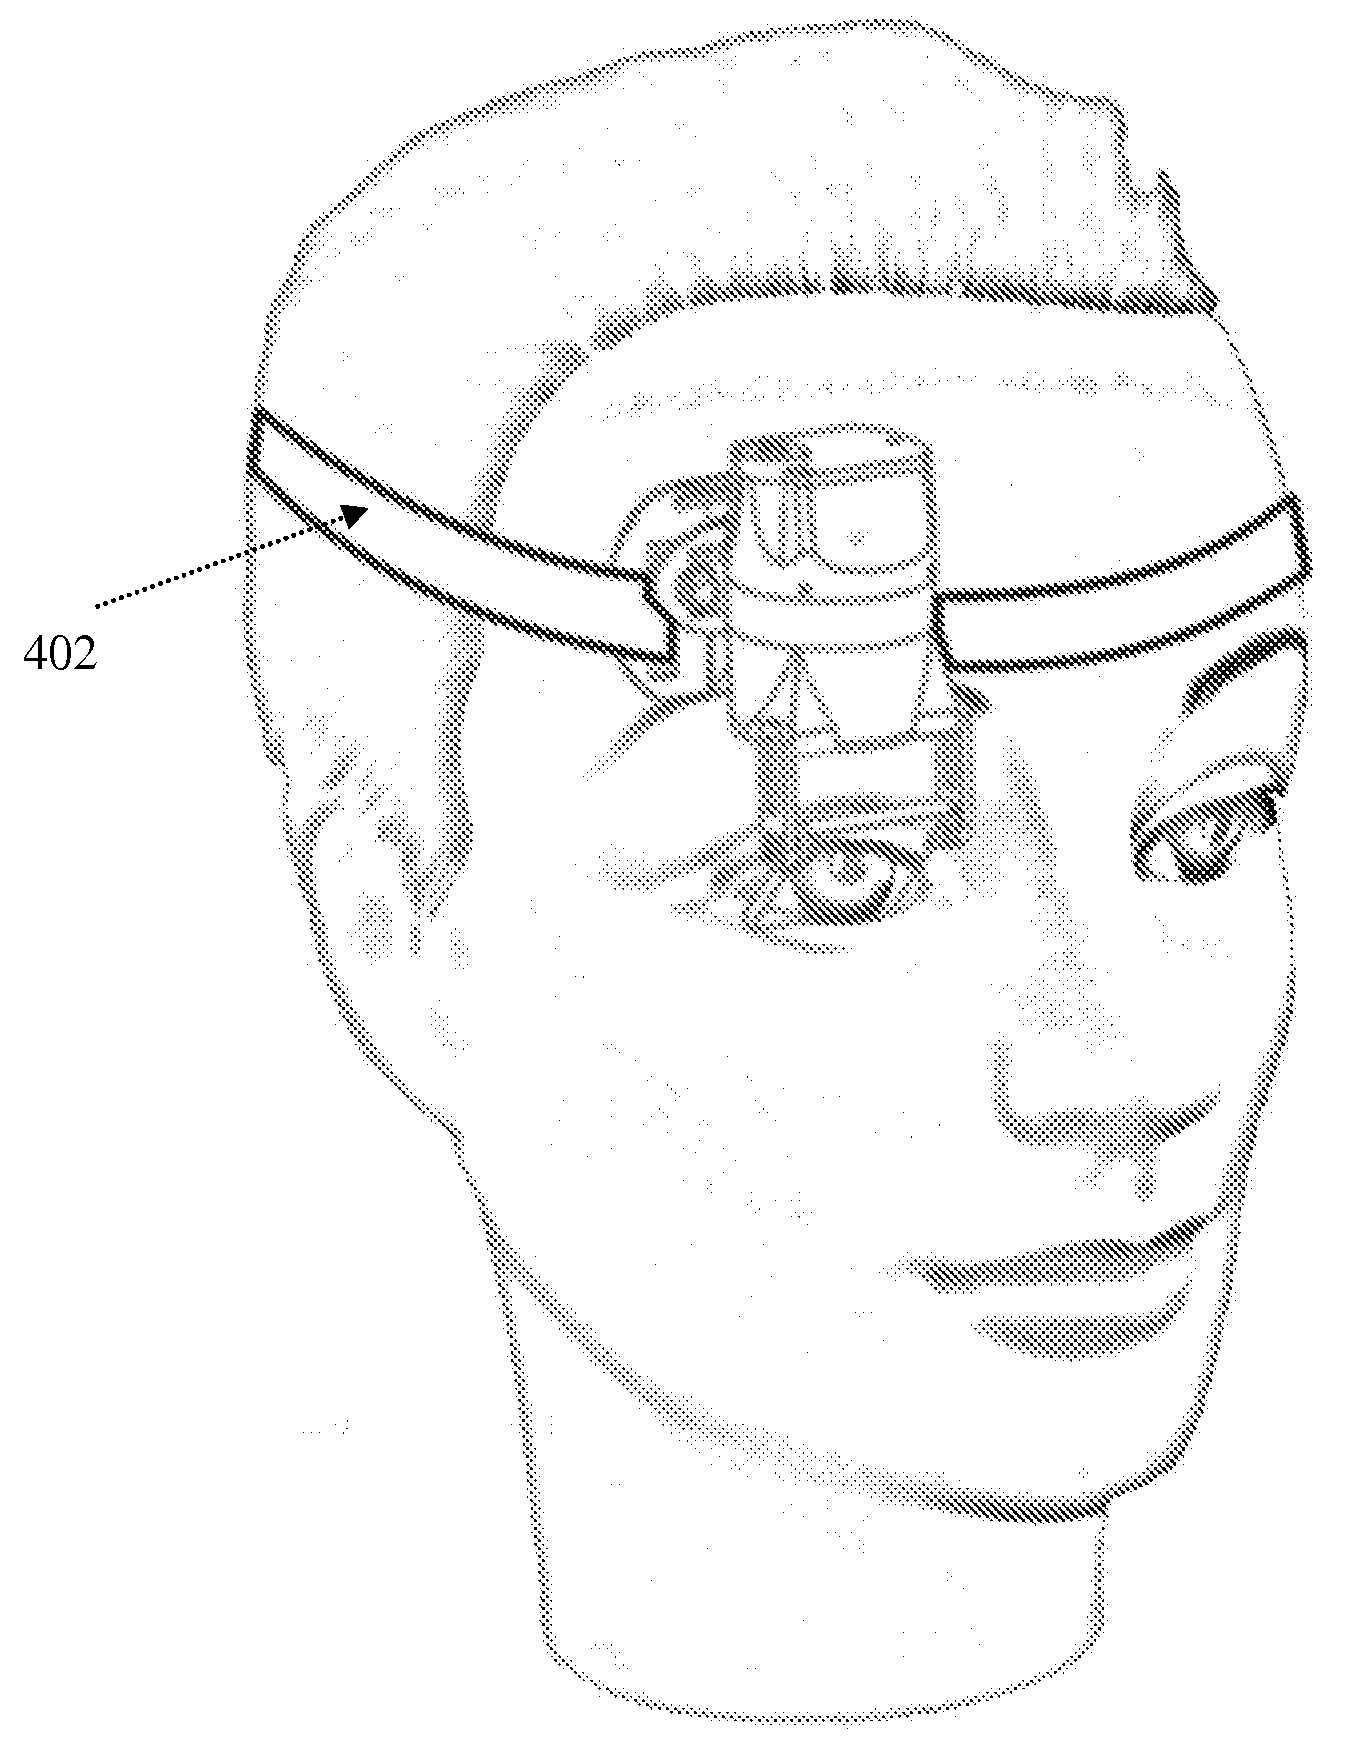 Apparatus for head mounted image display